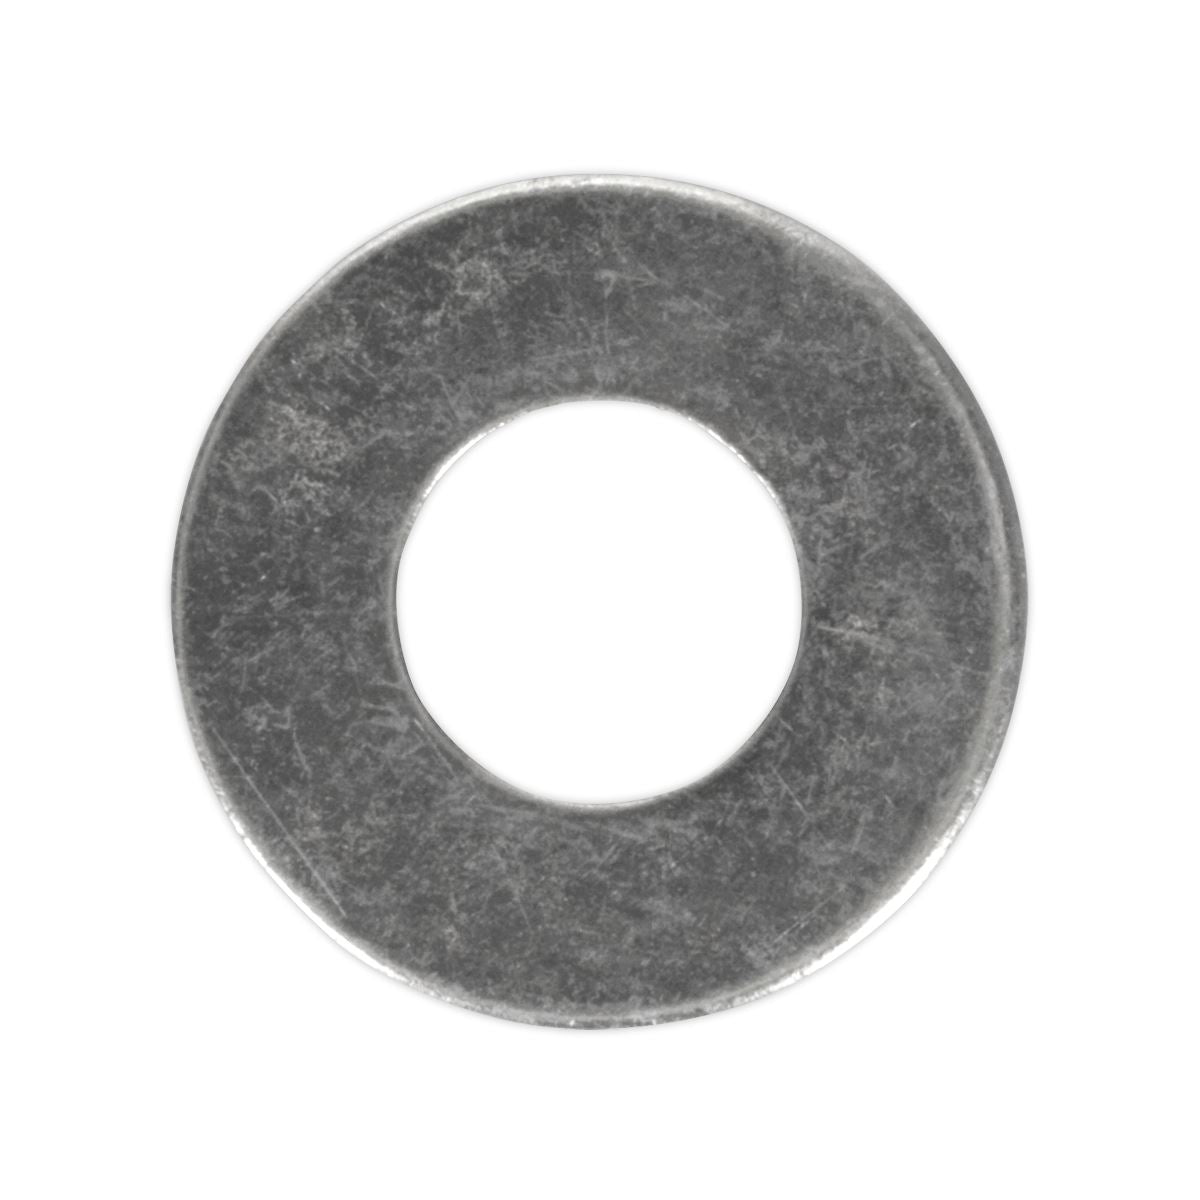 Sealey Flat Washer M6 x 14mm Form C Pack of 100